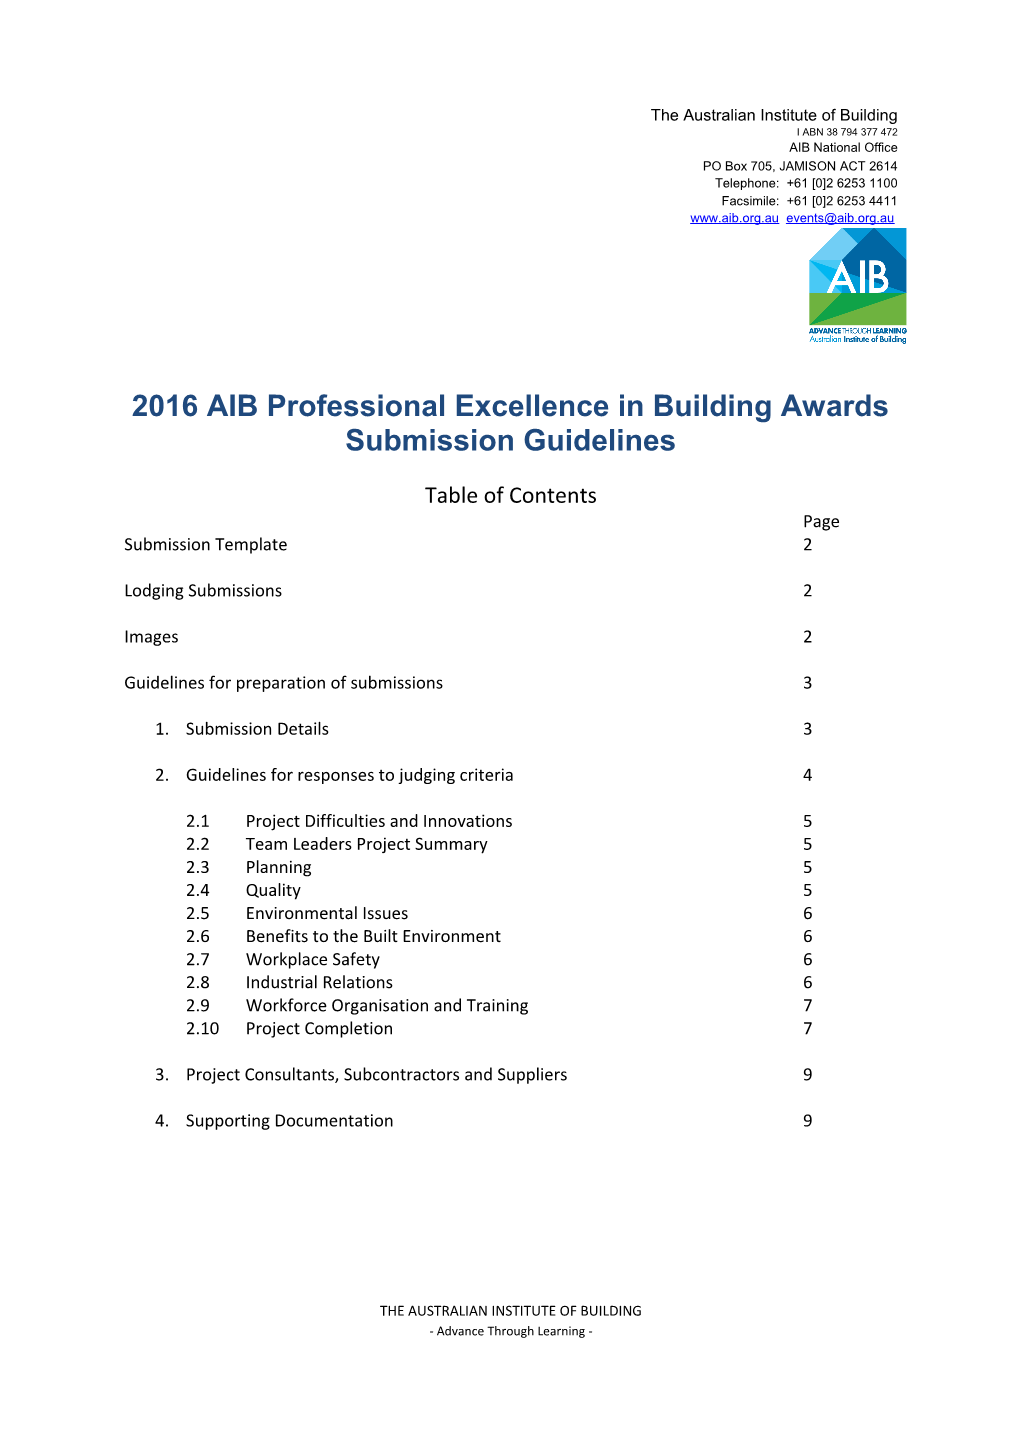 2016 AIB Professional Excellence in Buildingawardssubmission Guidelines